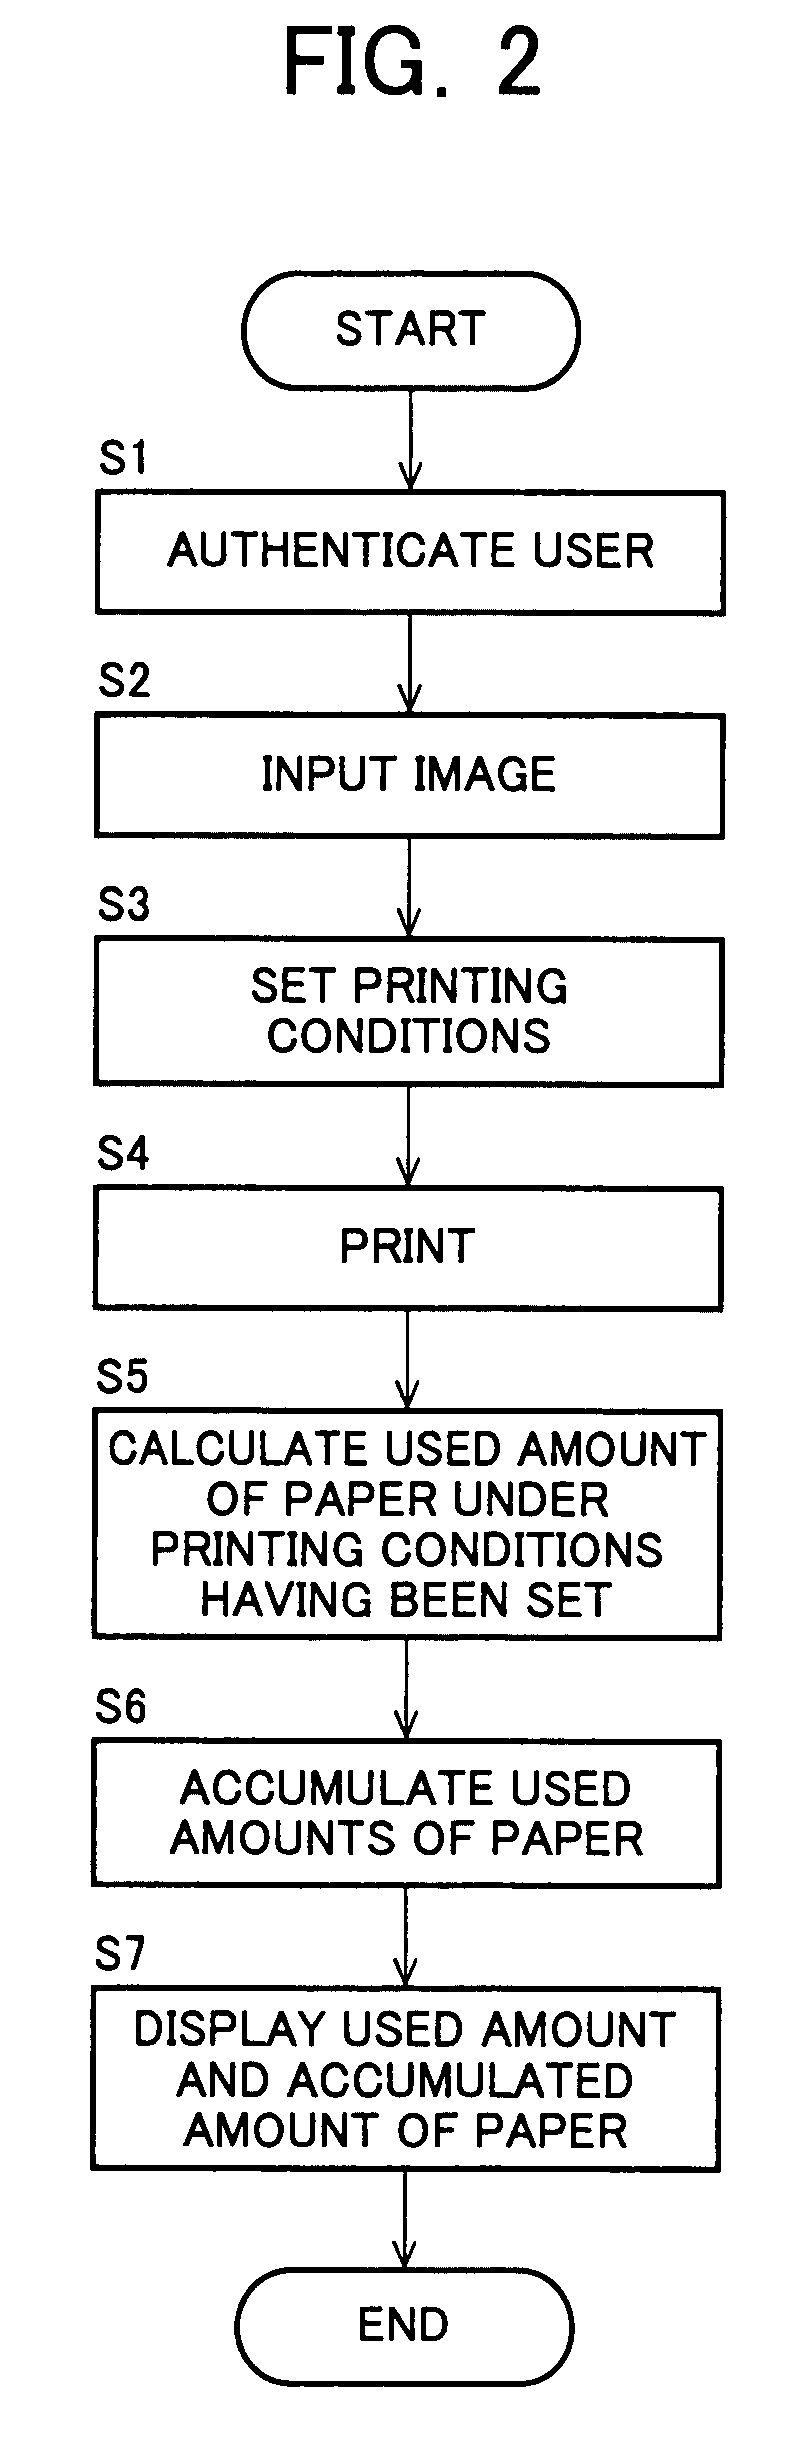 Image forming apparatus, image forming method, and program for improving the interest of the user in environmental resource exhaustion